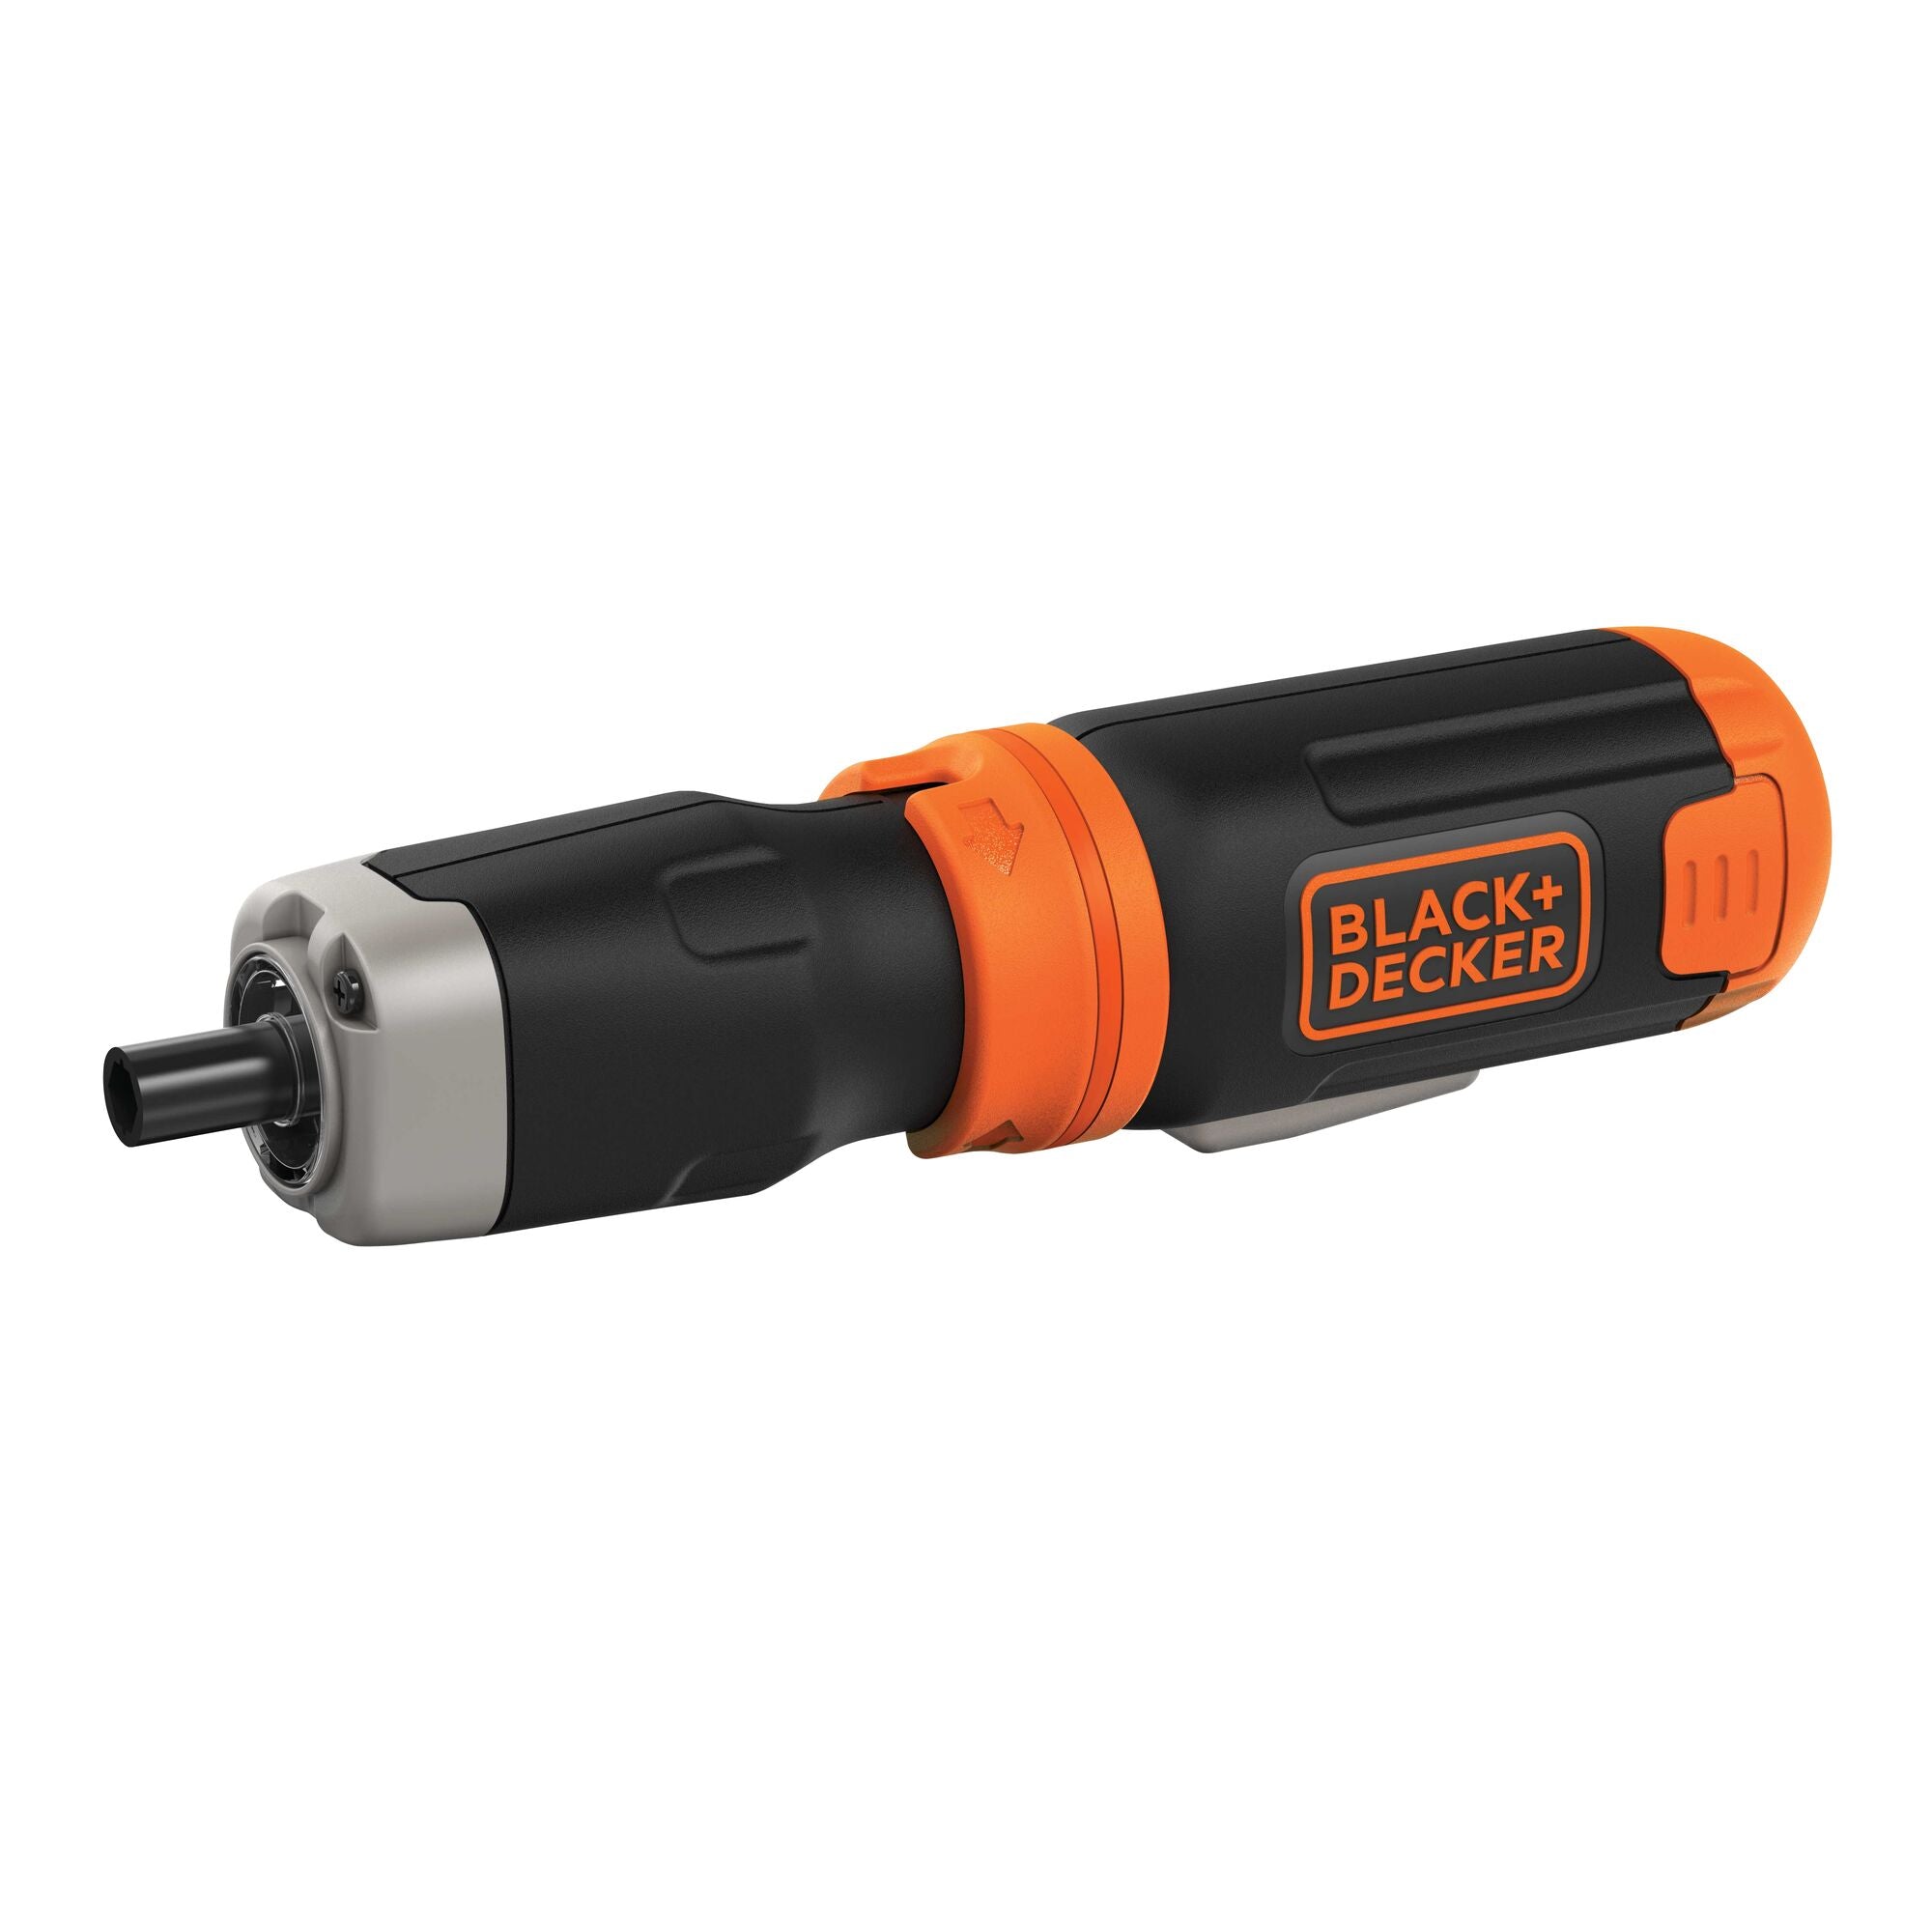 battery powered screwdriver includes 5 driving bits